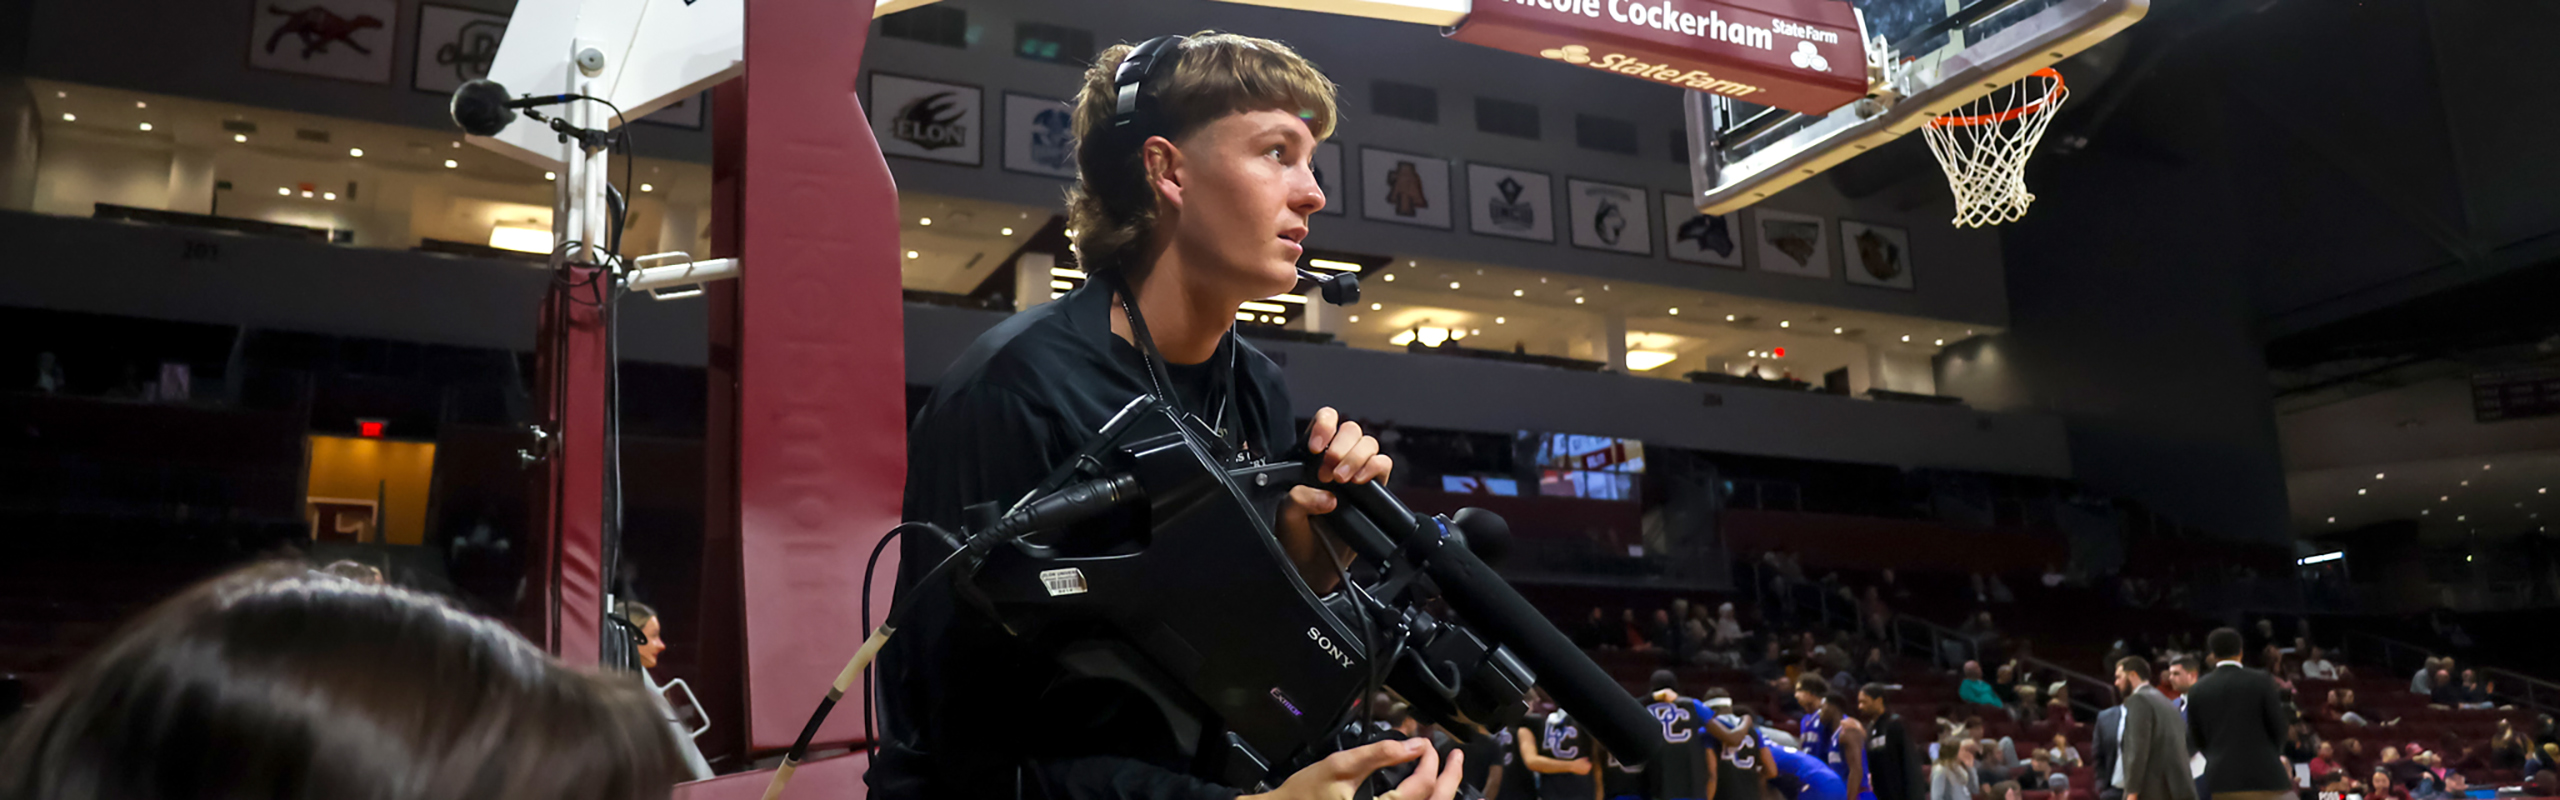 Strickland, enrolled at Elon, one of the best sports broadcasting schools, sits under the basketball goal with a camera in his hands. He is interested in sports broadcasting and sports media,